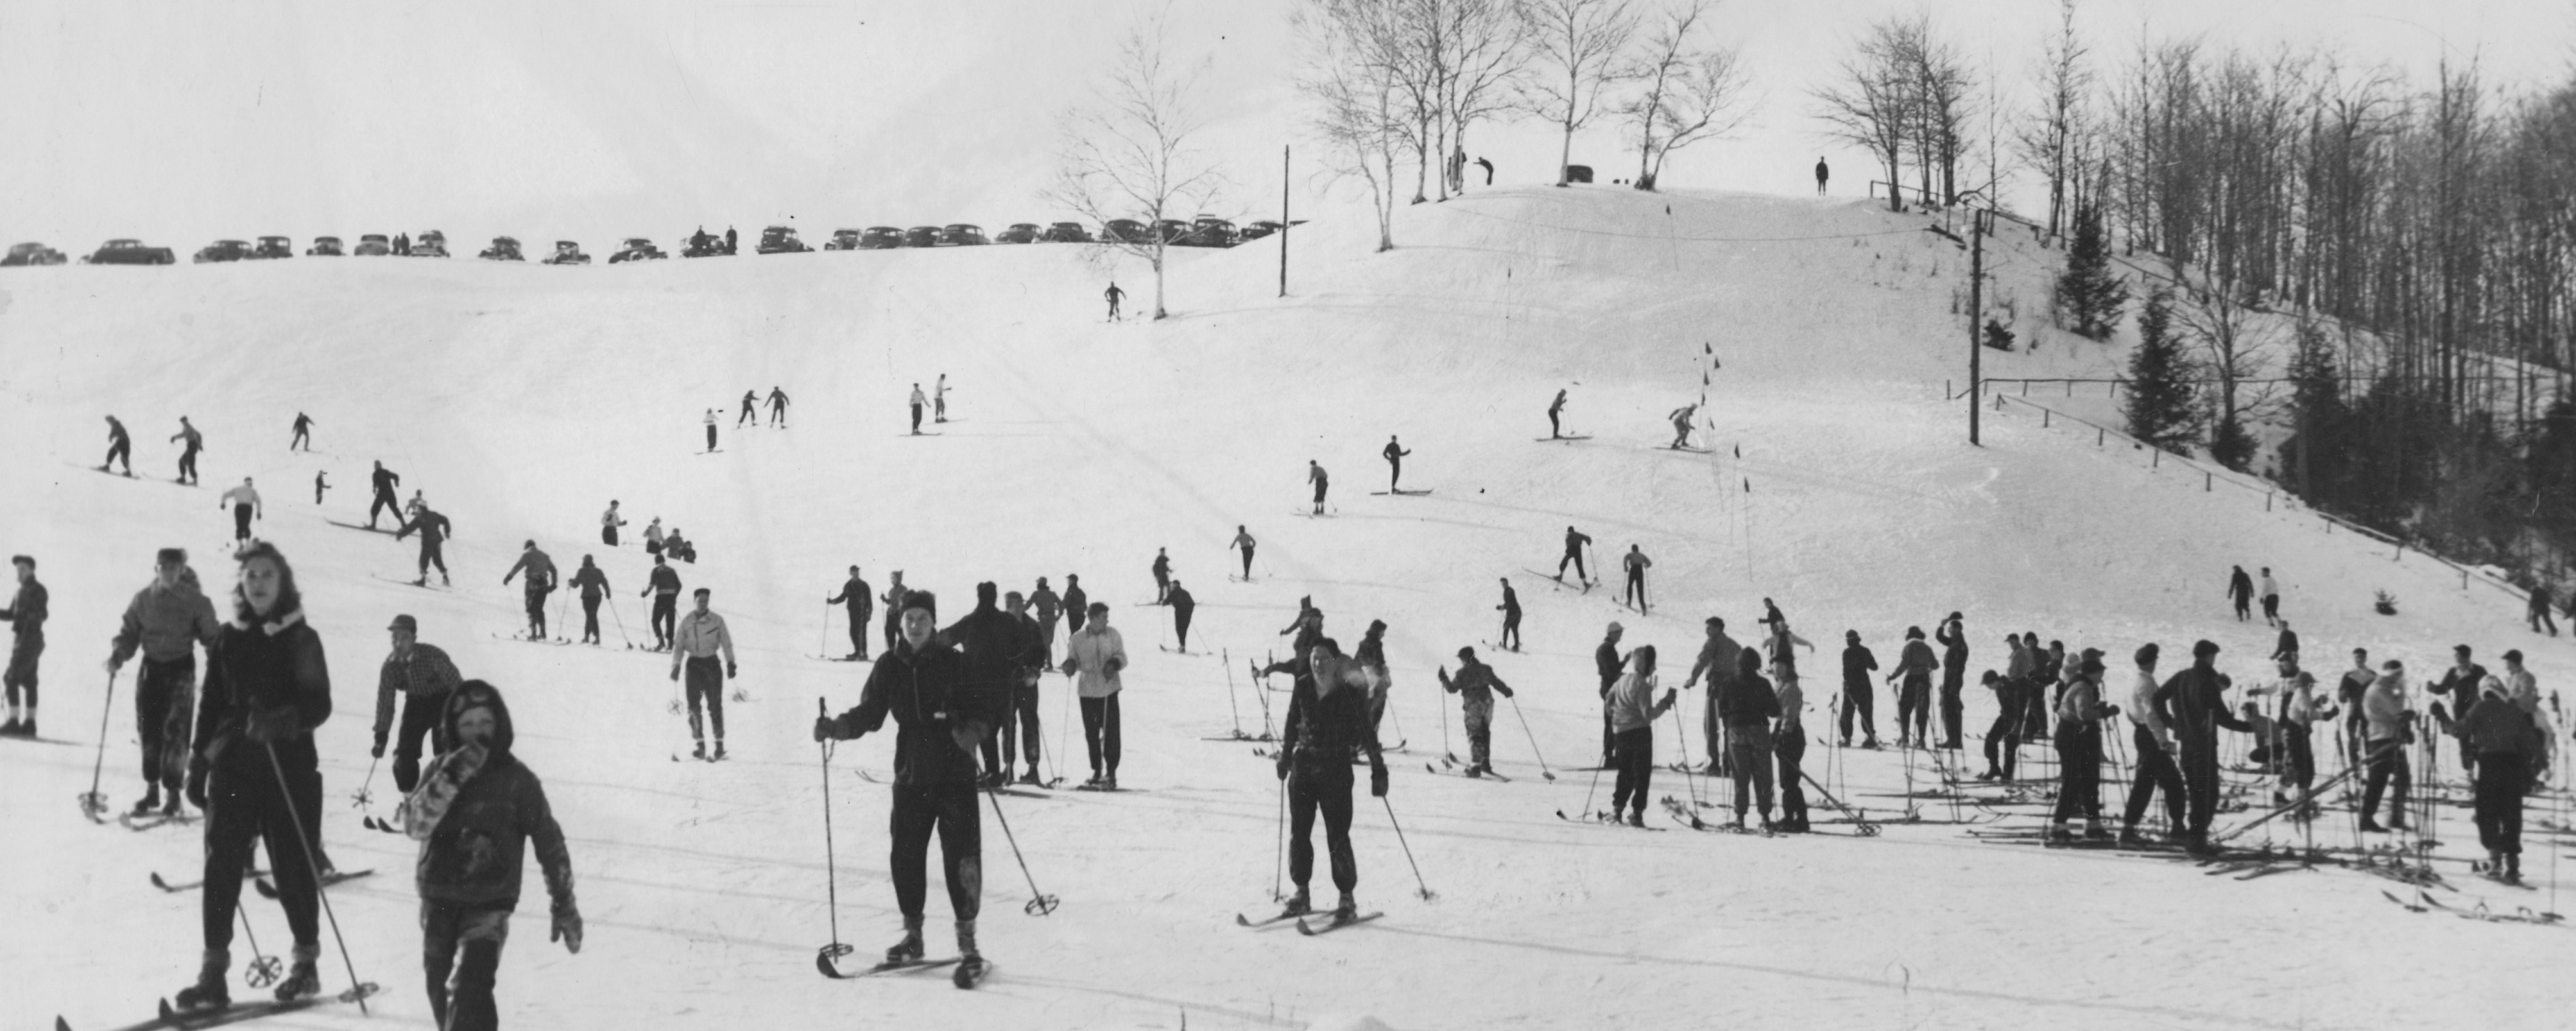 old photo of many people skiing